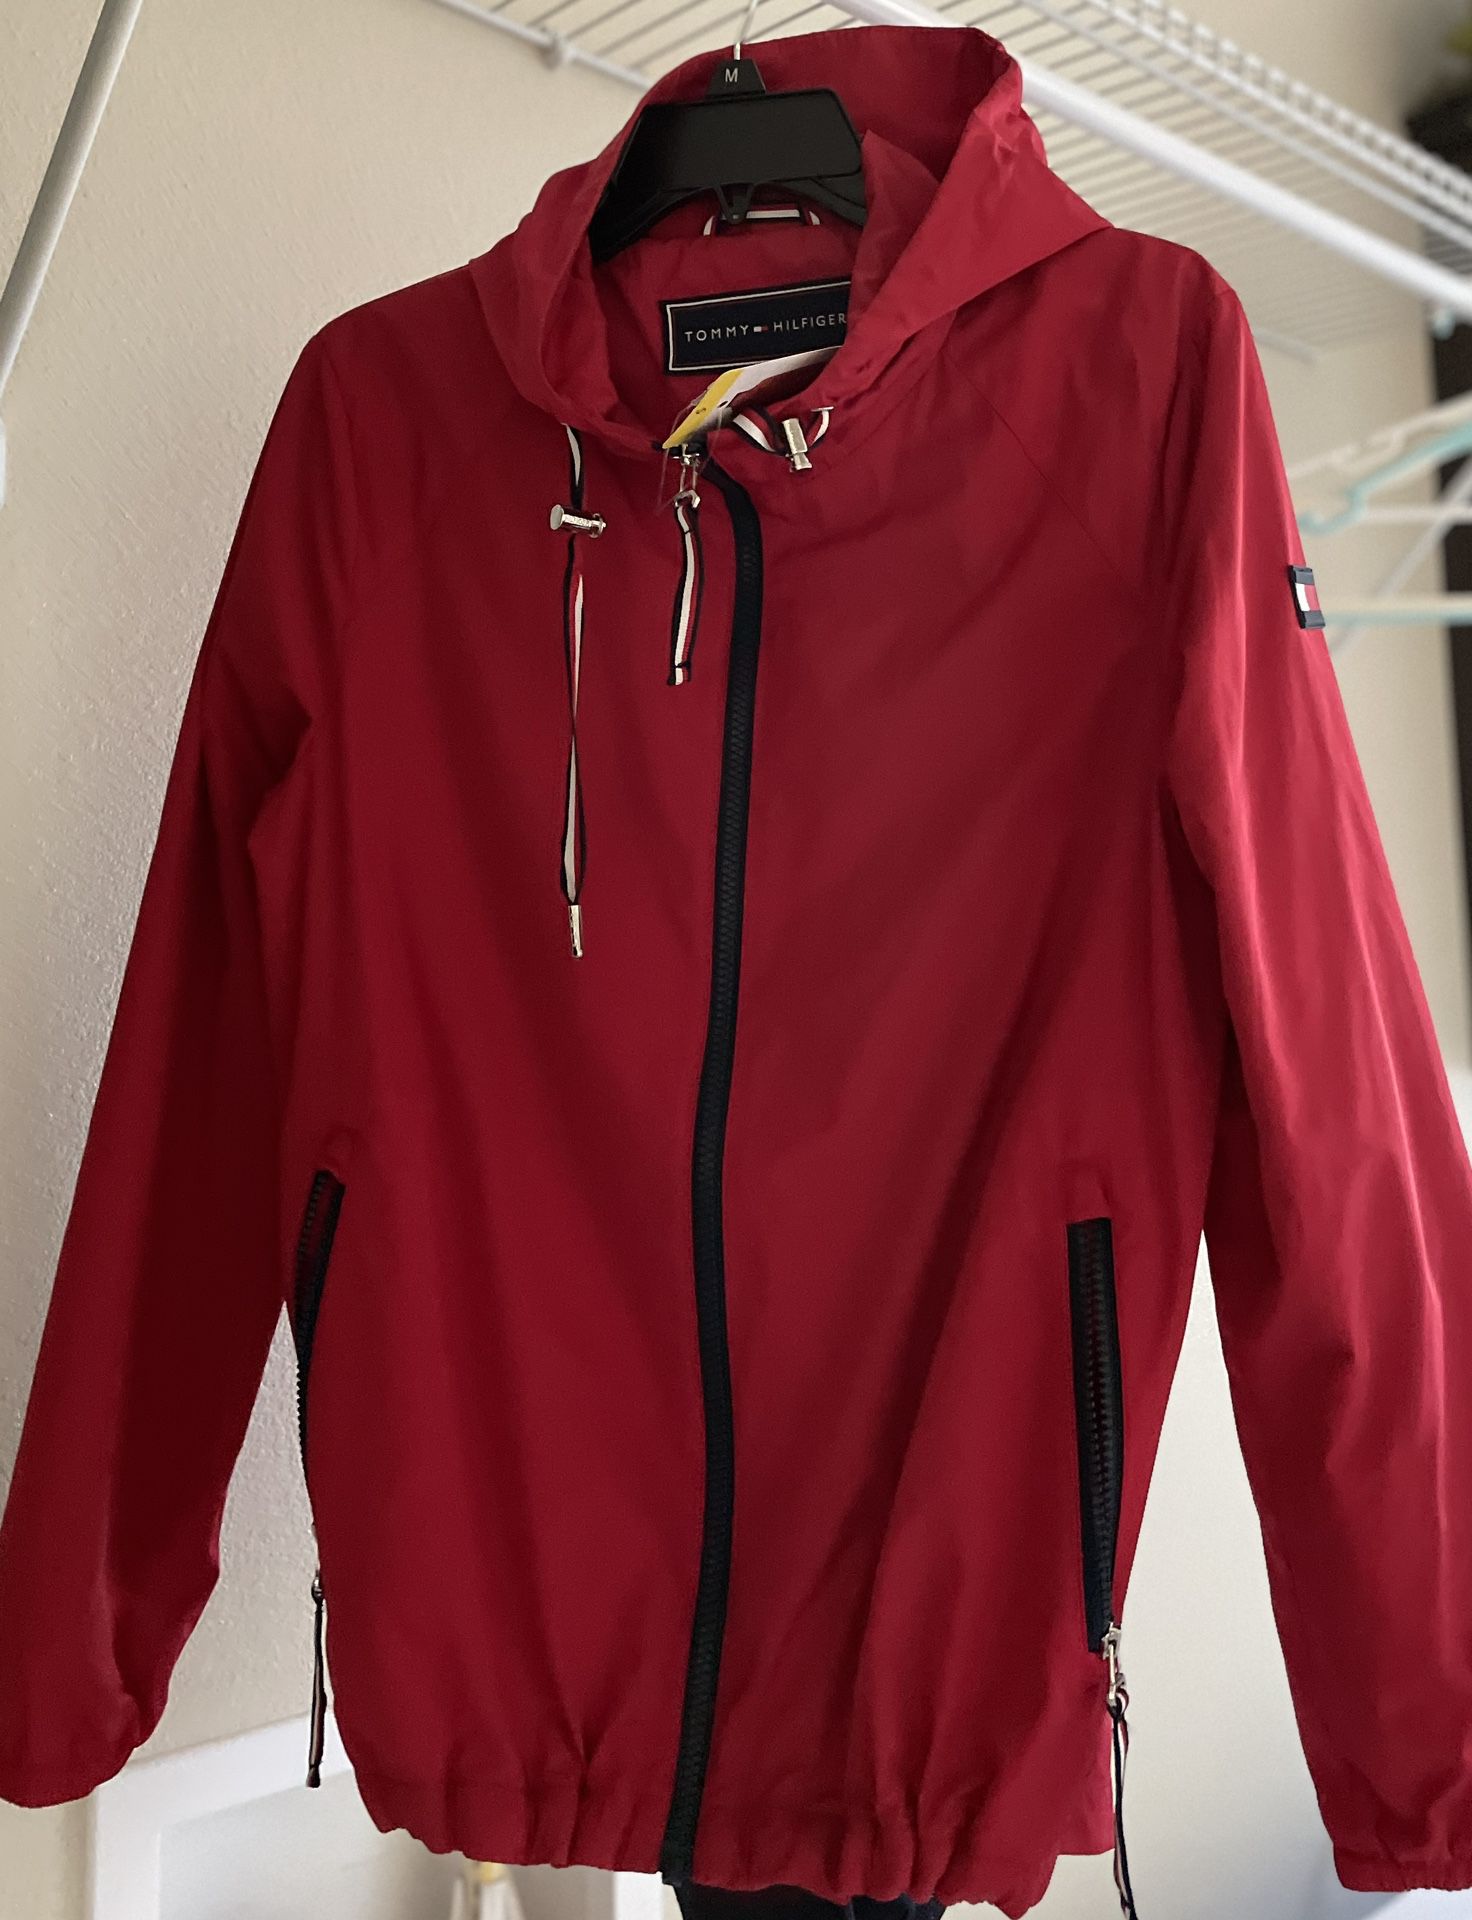 New Tommy Hilfiger Red Jacket Size S